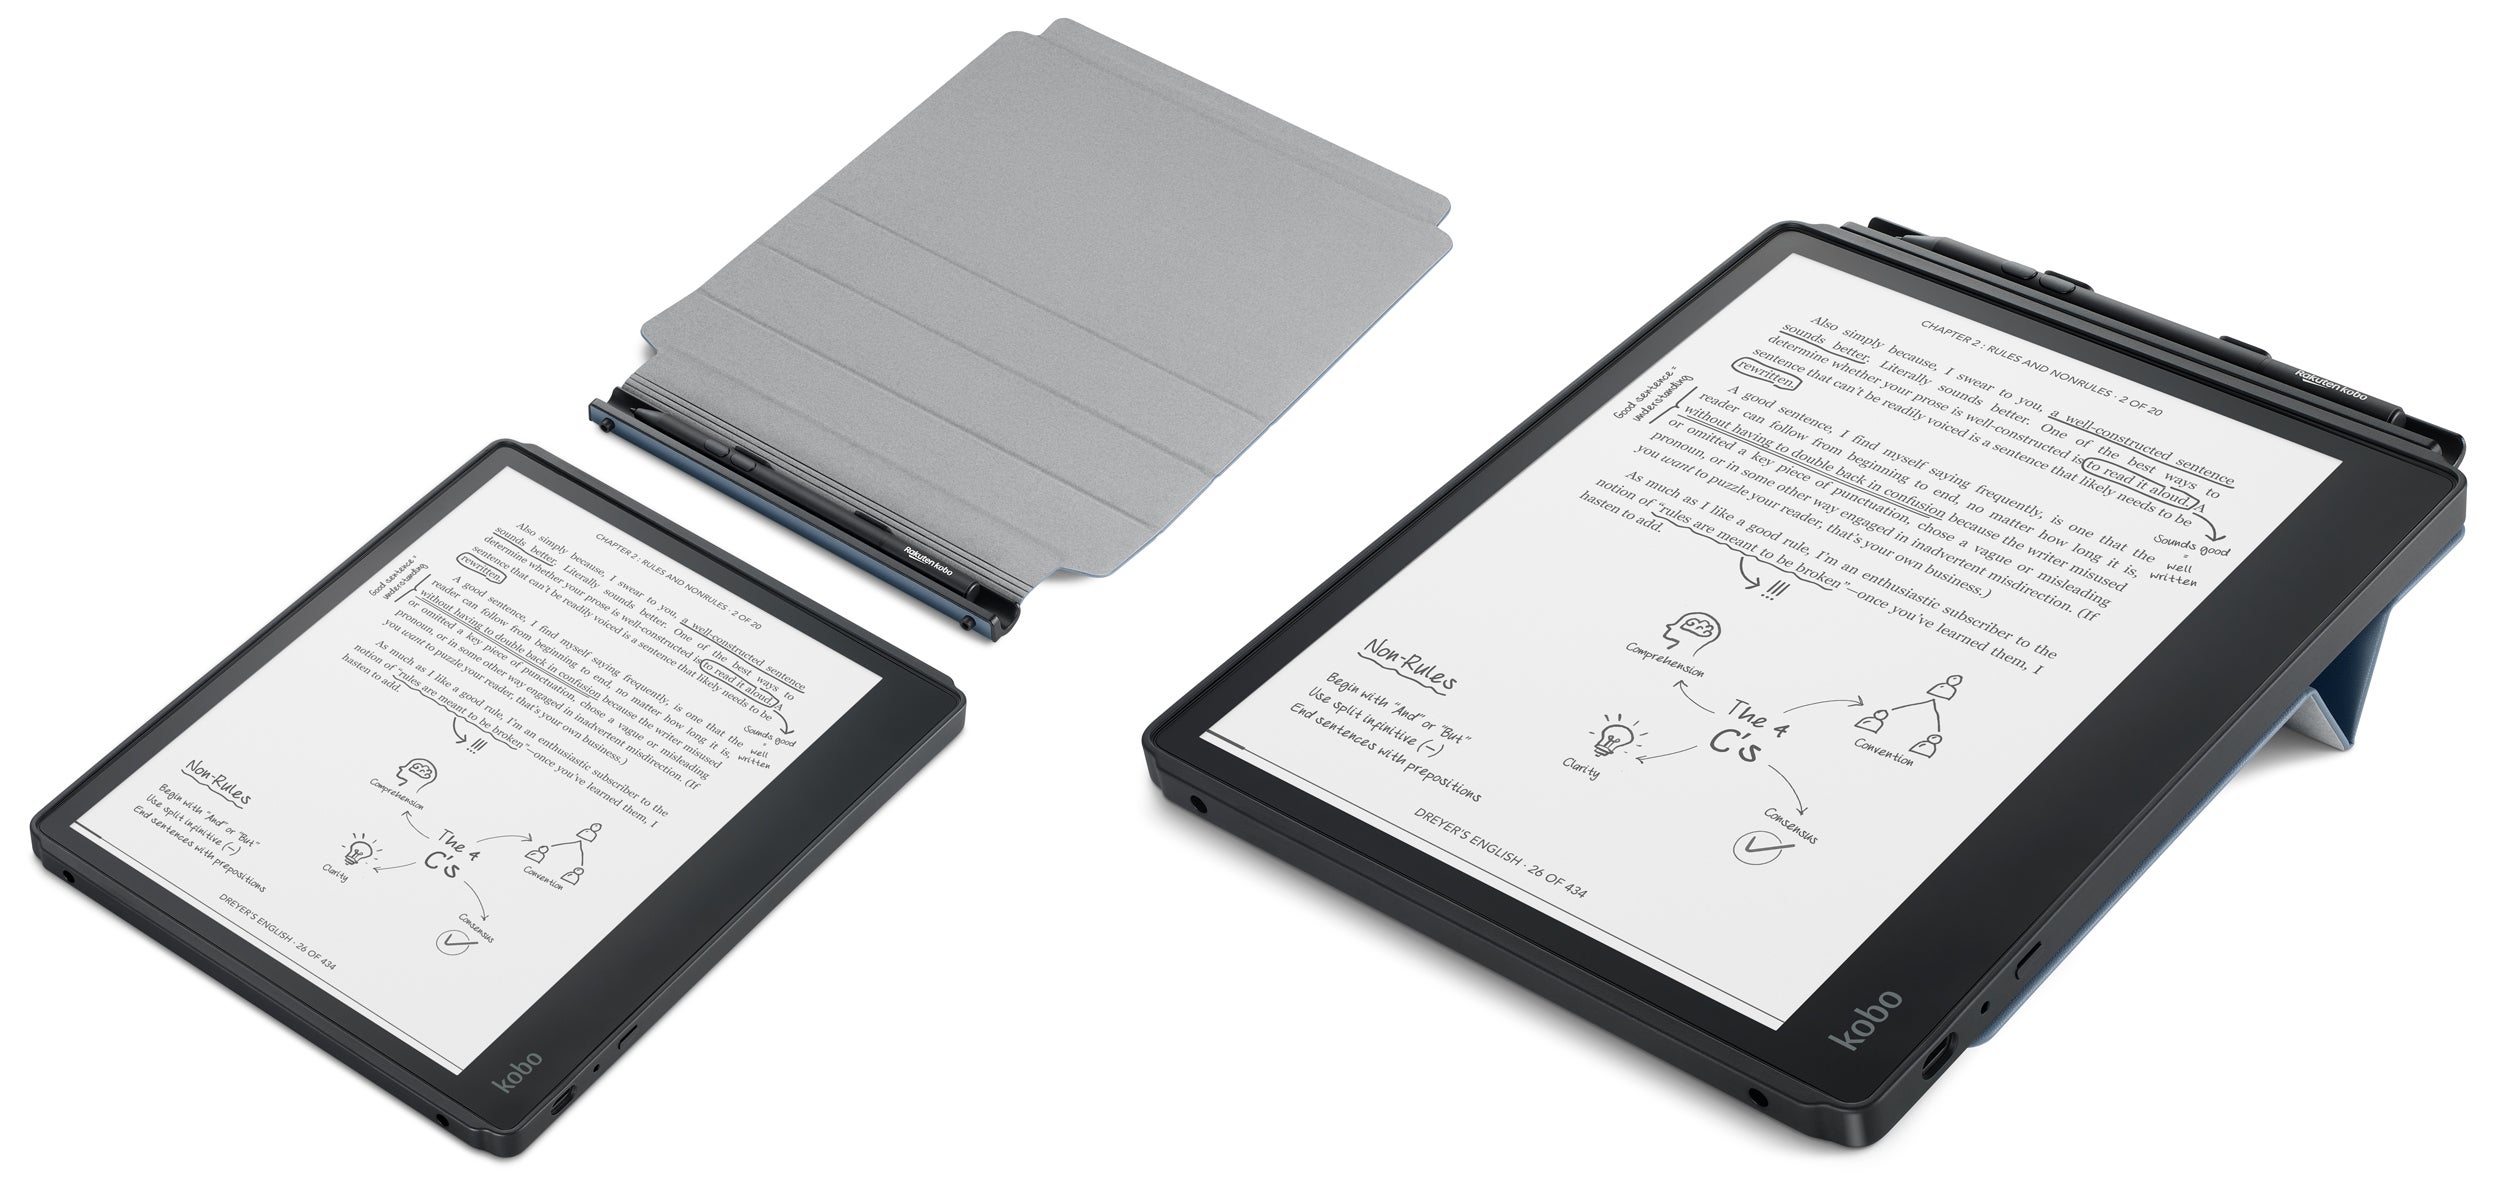 Unlike Kobo's ereaders, which offer a case as a separately purchased accessory, the Elipsa includes a removable sleep cover with integrated stylus storage. (Image: Rakuten Kobo)